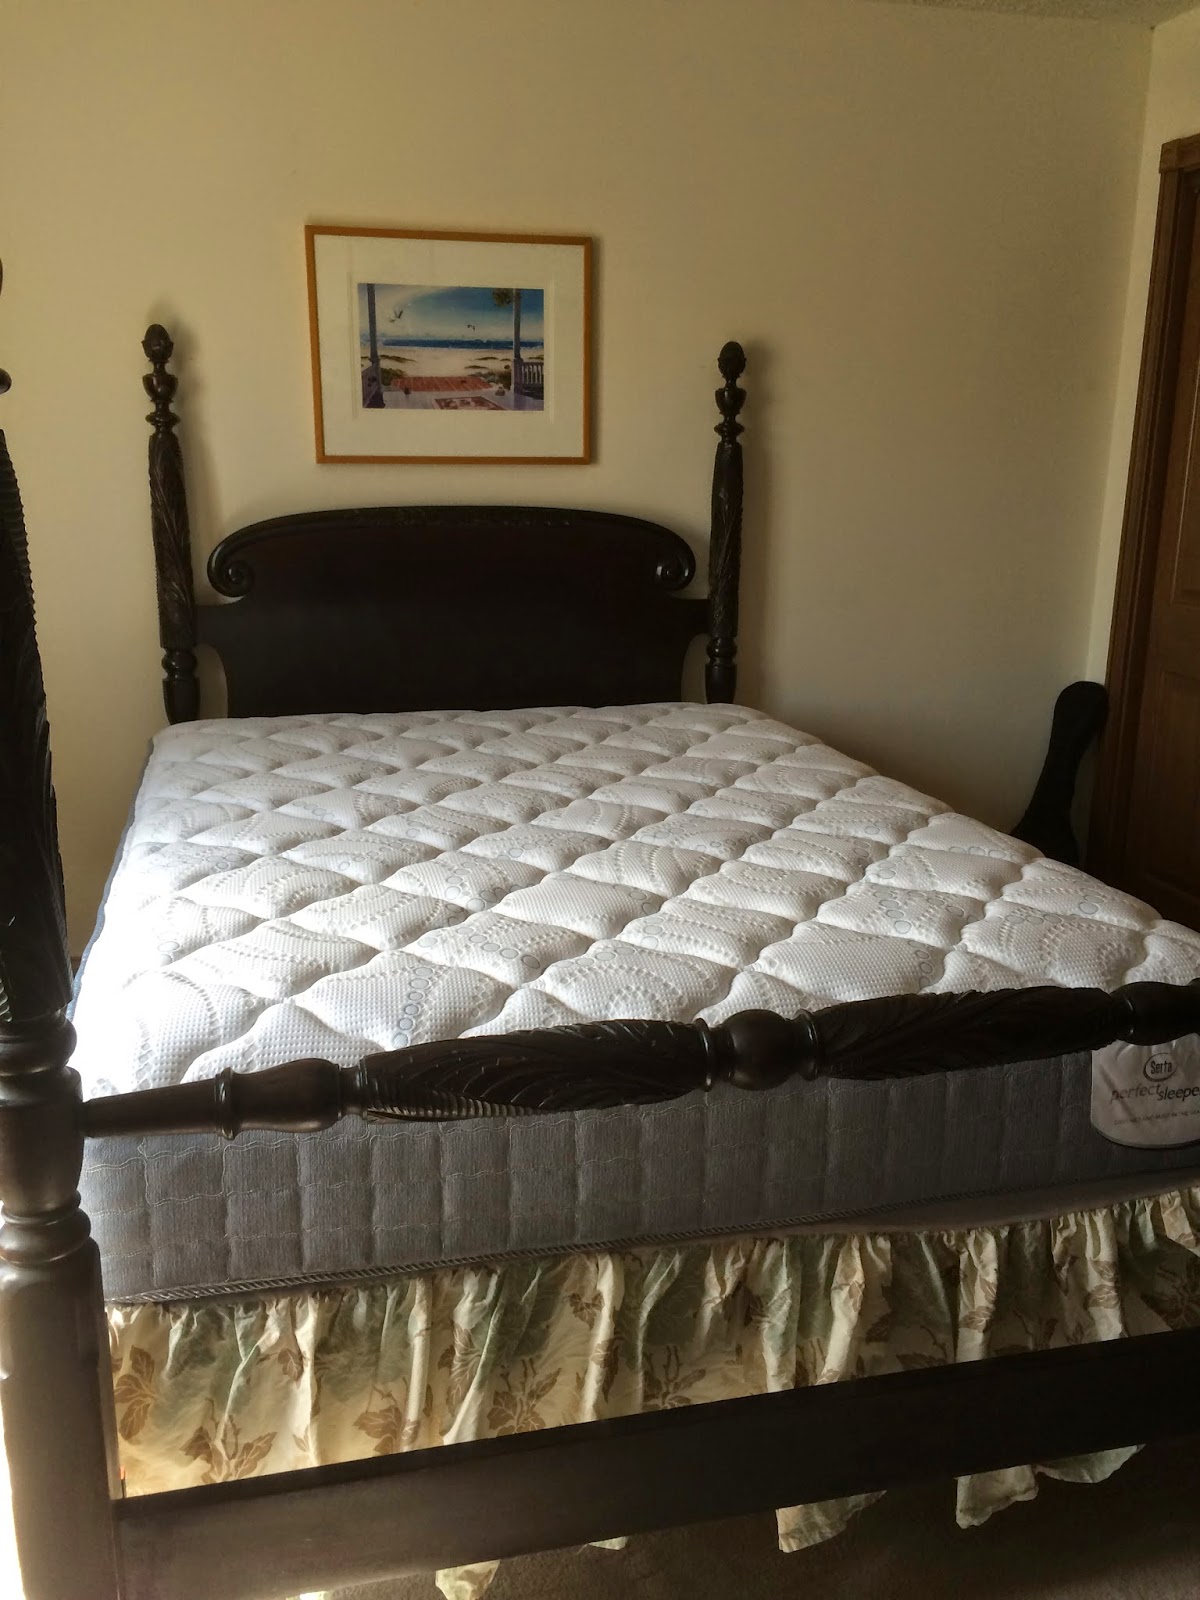 Converting Antique Bed To Queen Mattress, Can You Turn A Full Size Bed Into Queen